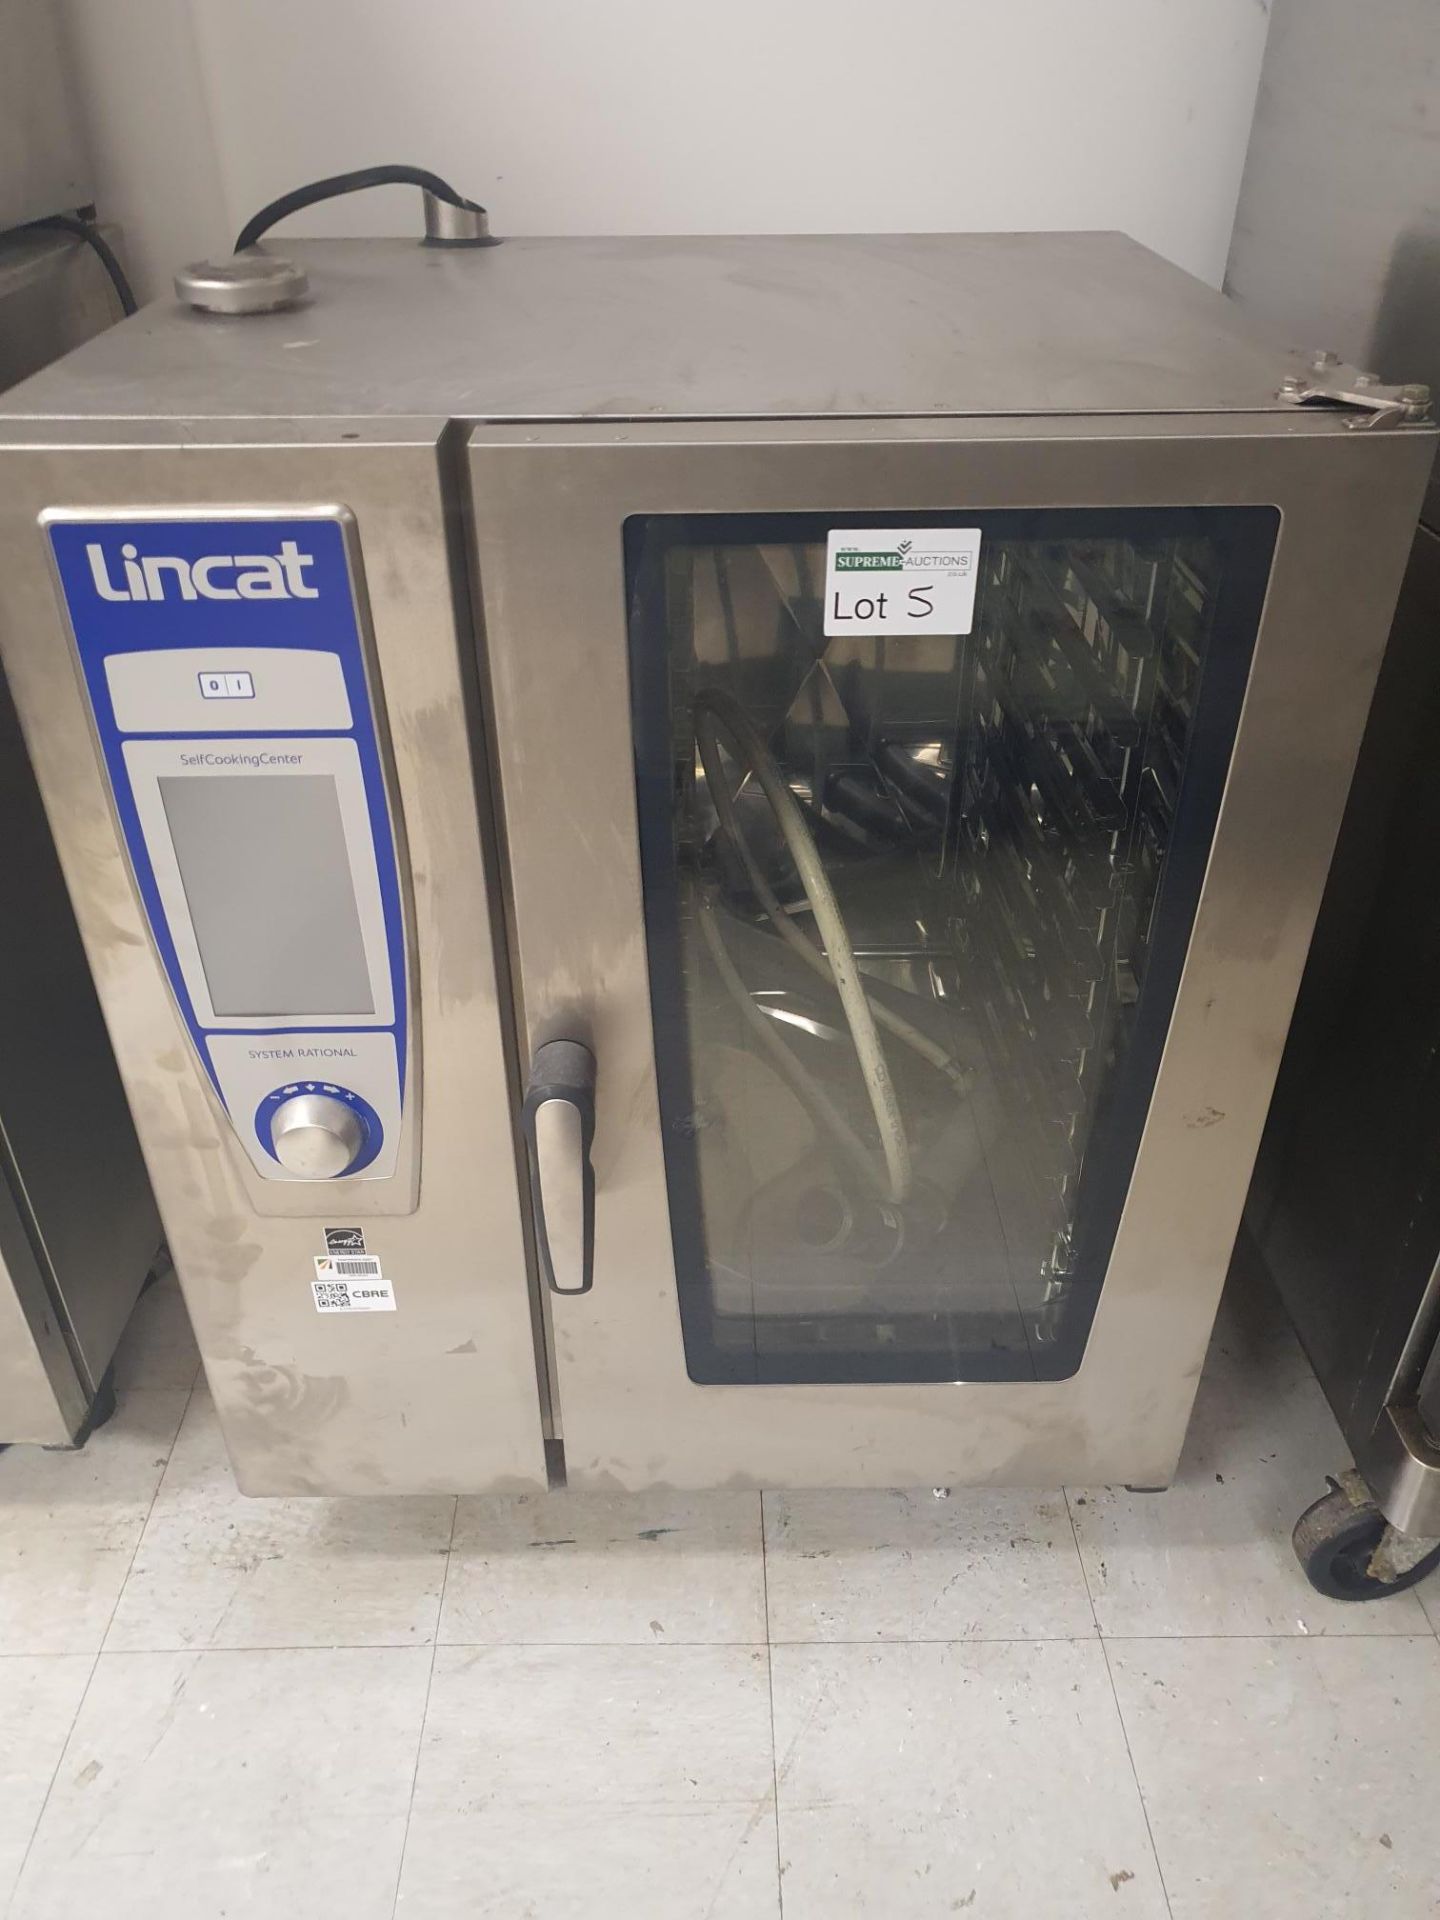 LINCAT OPUS SELF COOKING CENTRE STEAMER MODEL OSC WE 101. THE HIGHLY EFFICIENT SELF COOKING